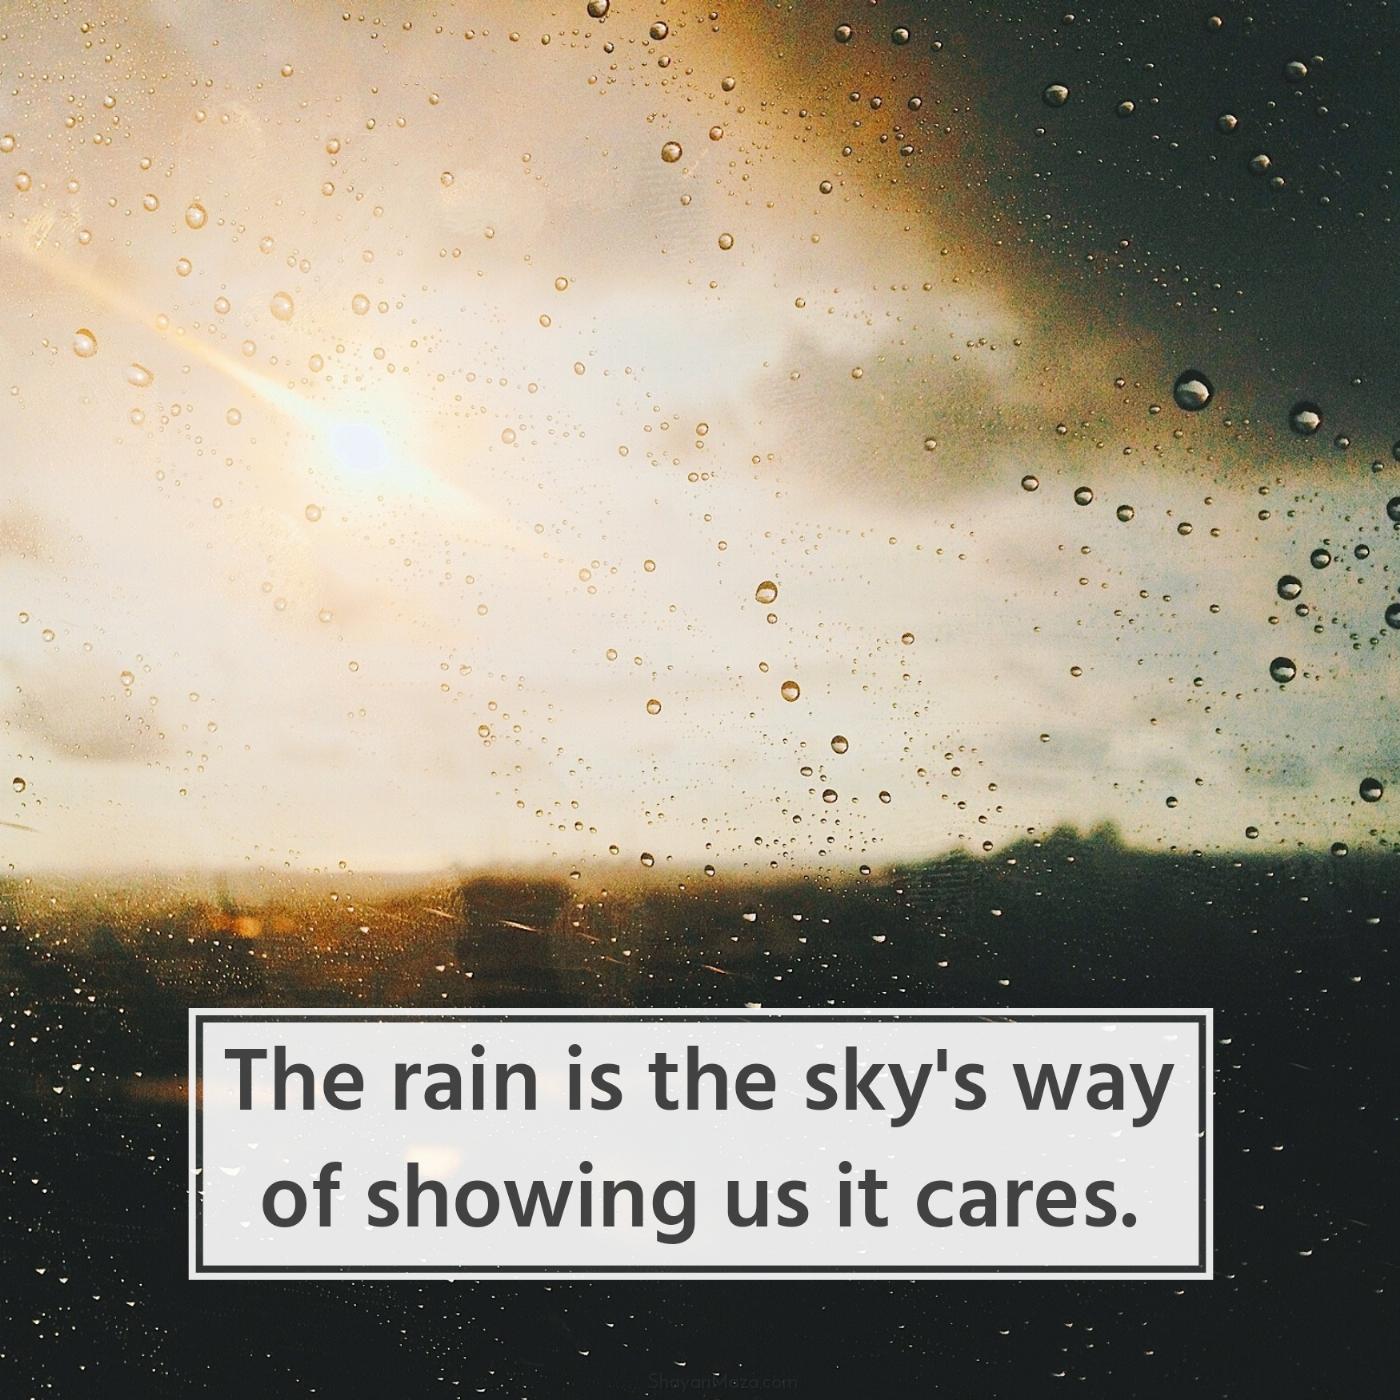 The rain is the sky's way of showing us it cares